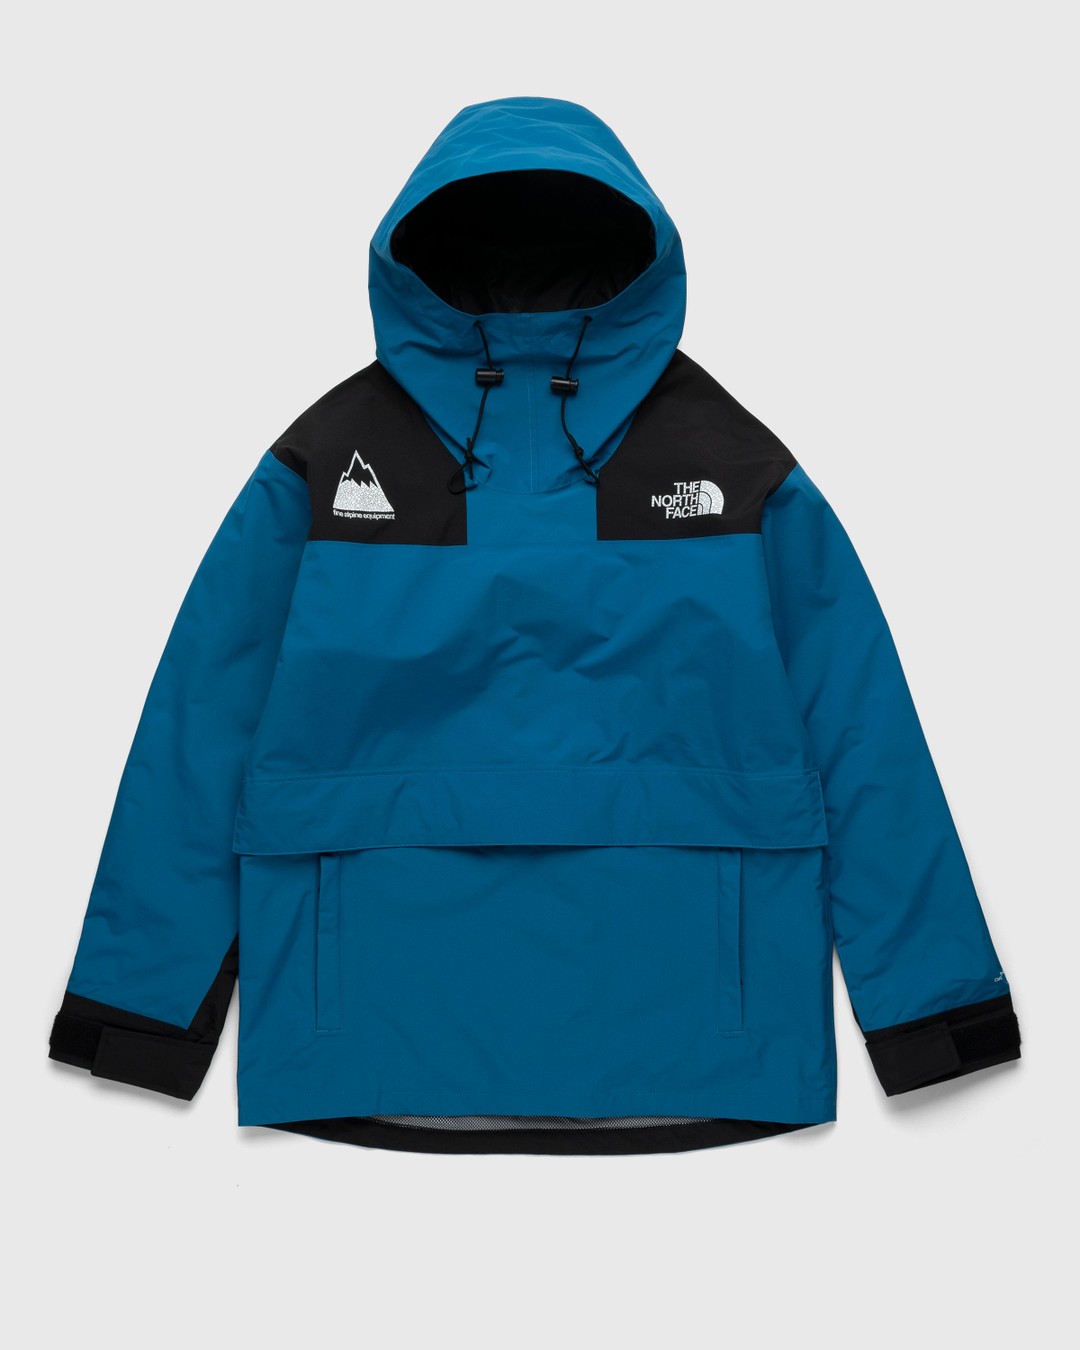 The North Face – M Origins 86 Mountain Anorak Banff Blue - Outerwear - Blue - Image 1